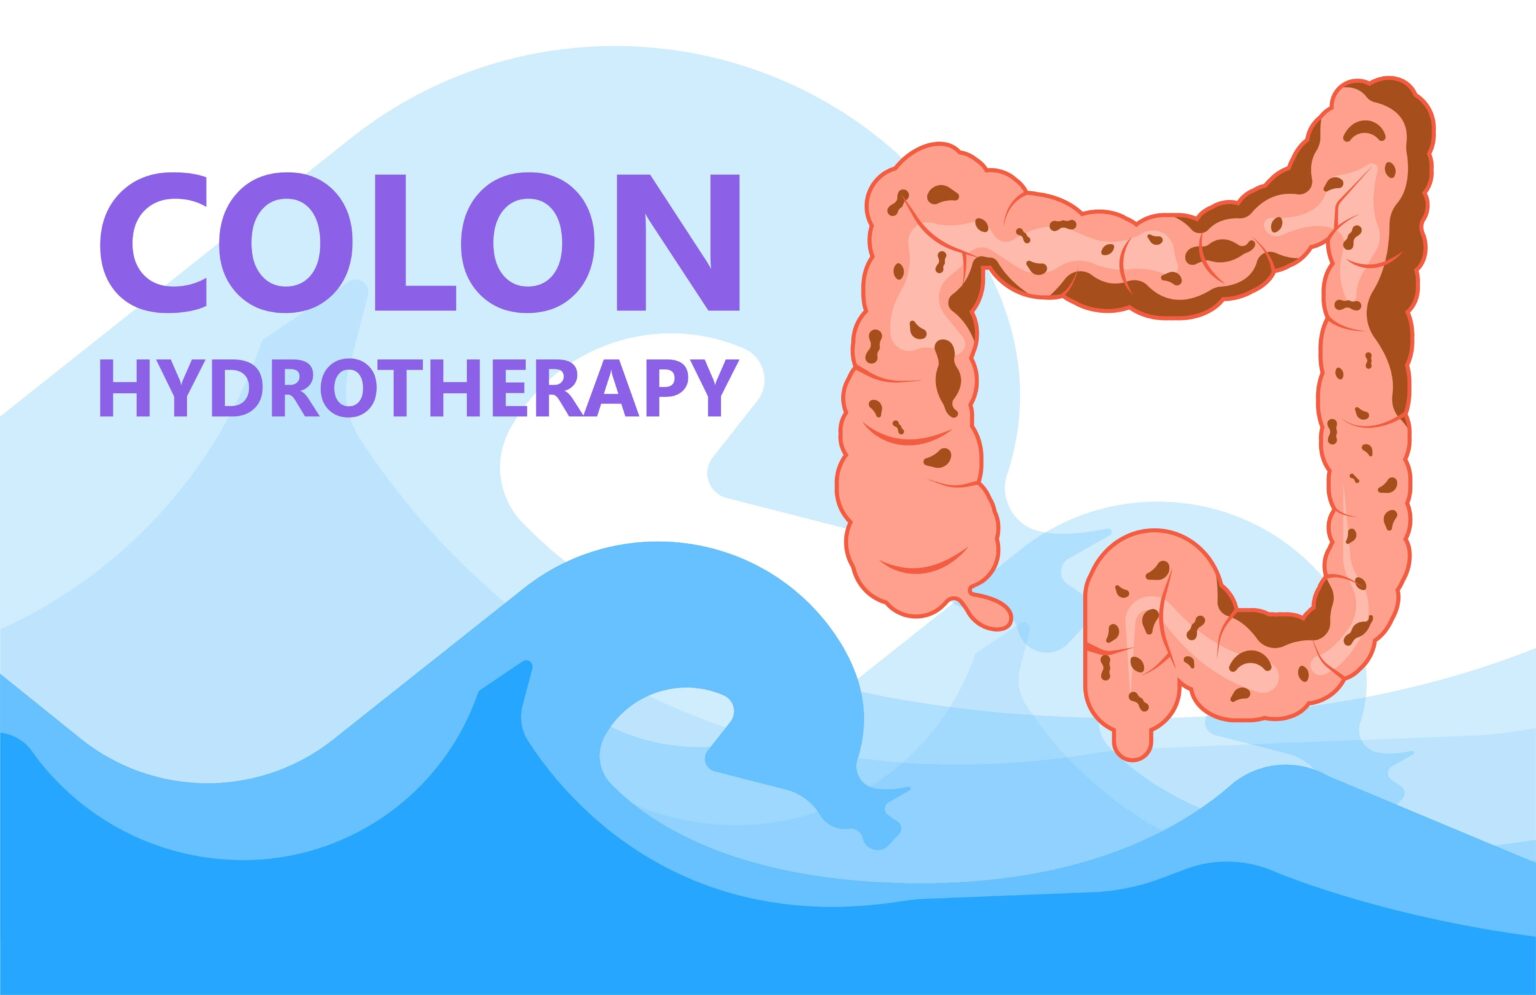 Colon Hydrotherapy Roberts Health Foods